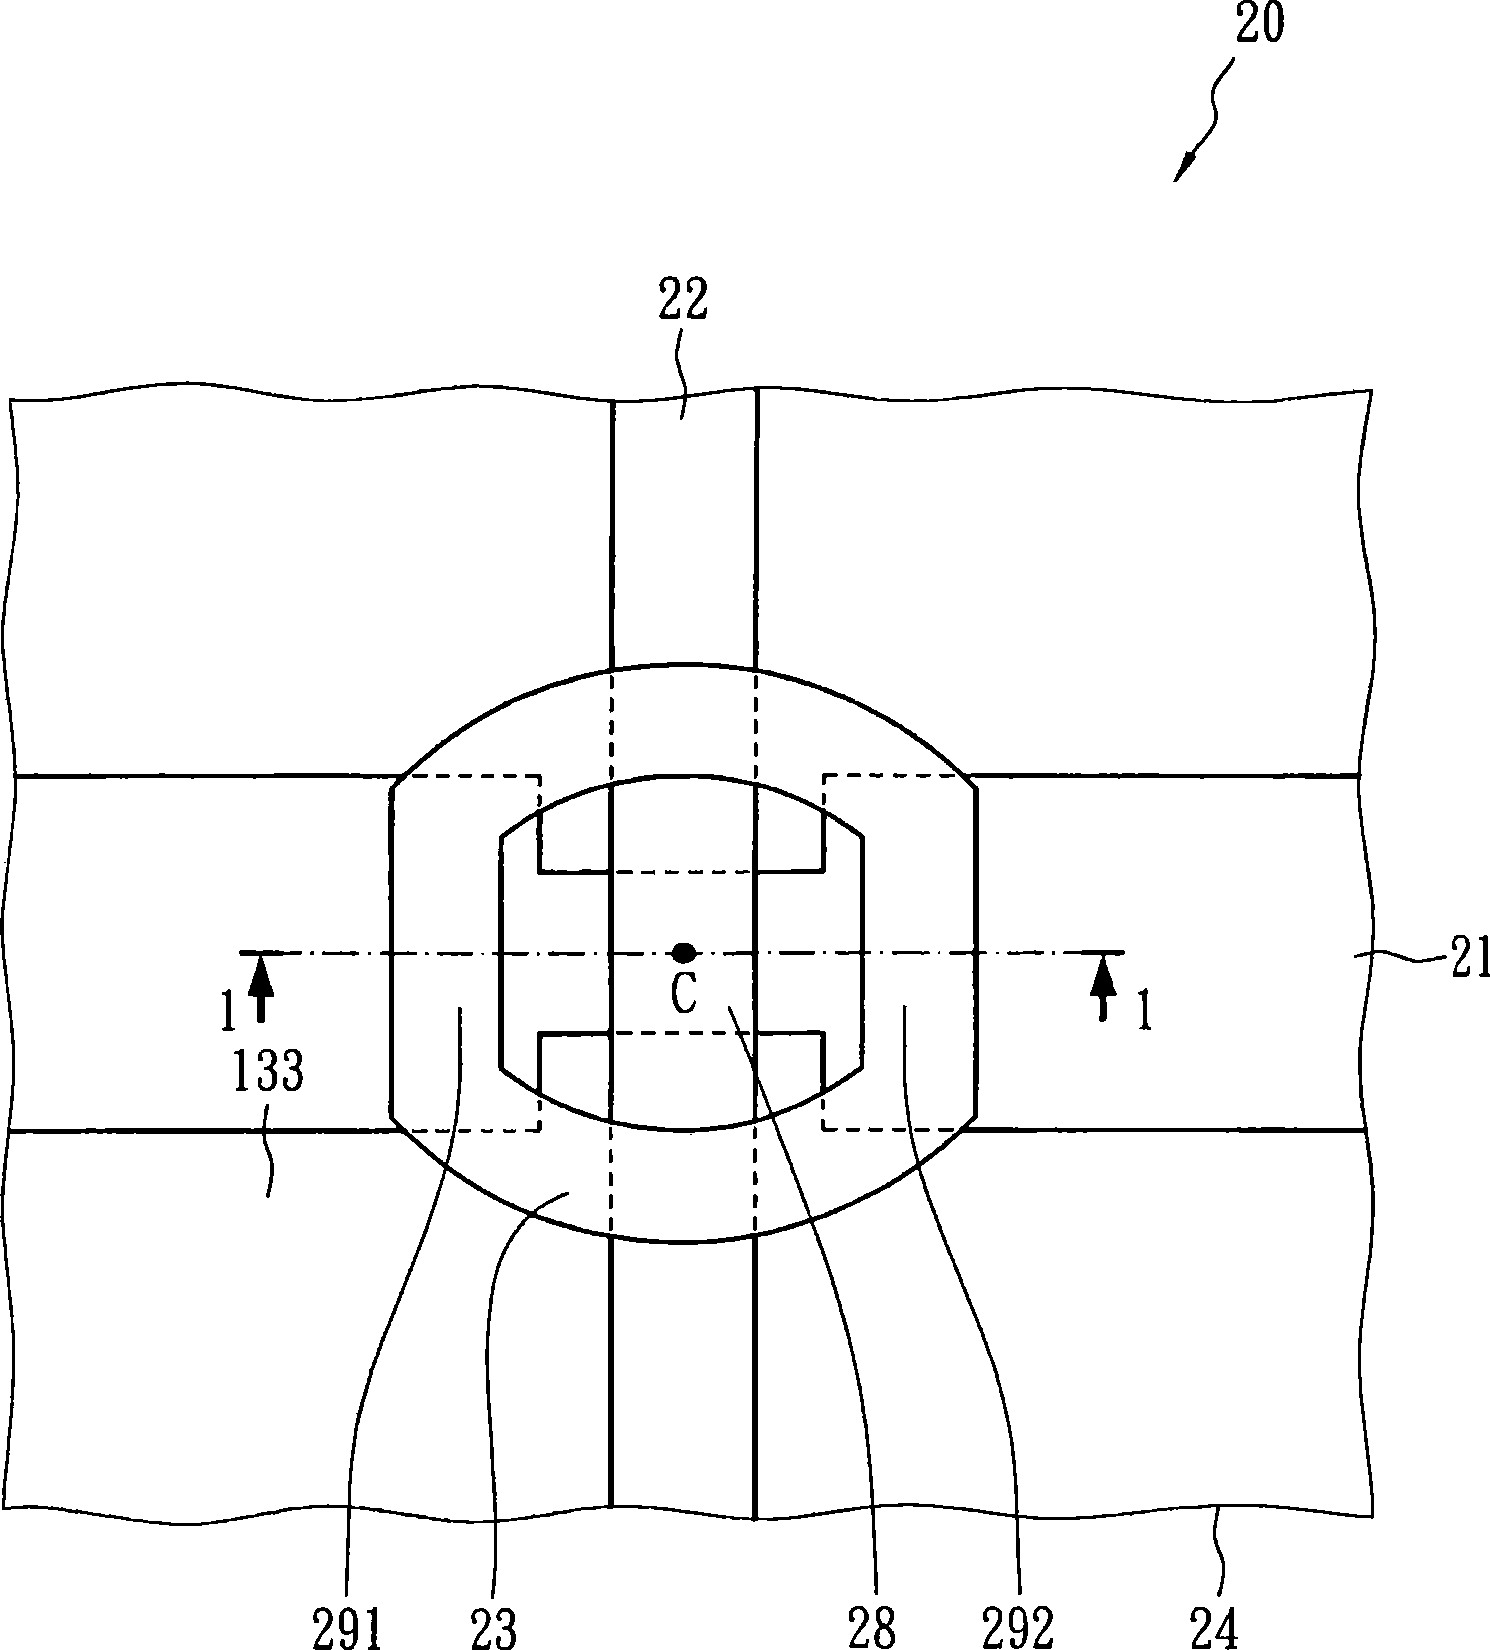 Display apparatus and repairing method therefor